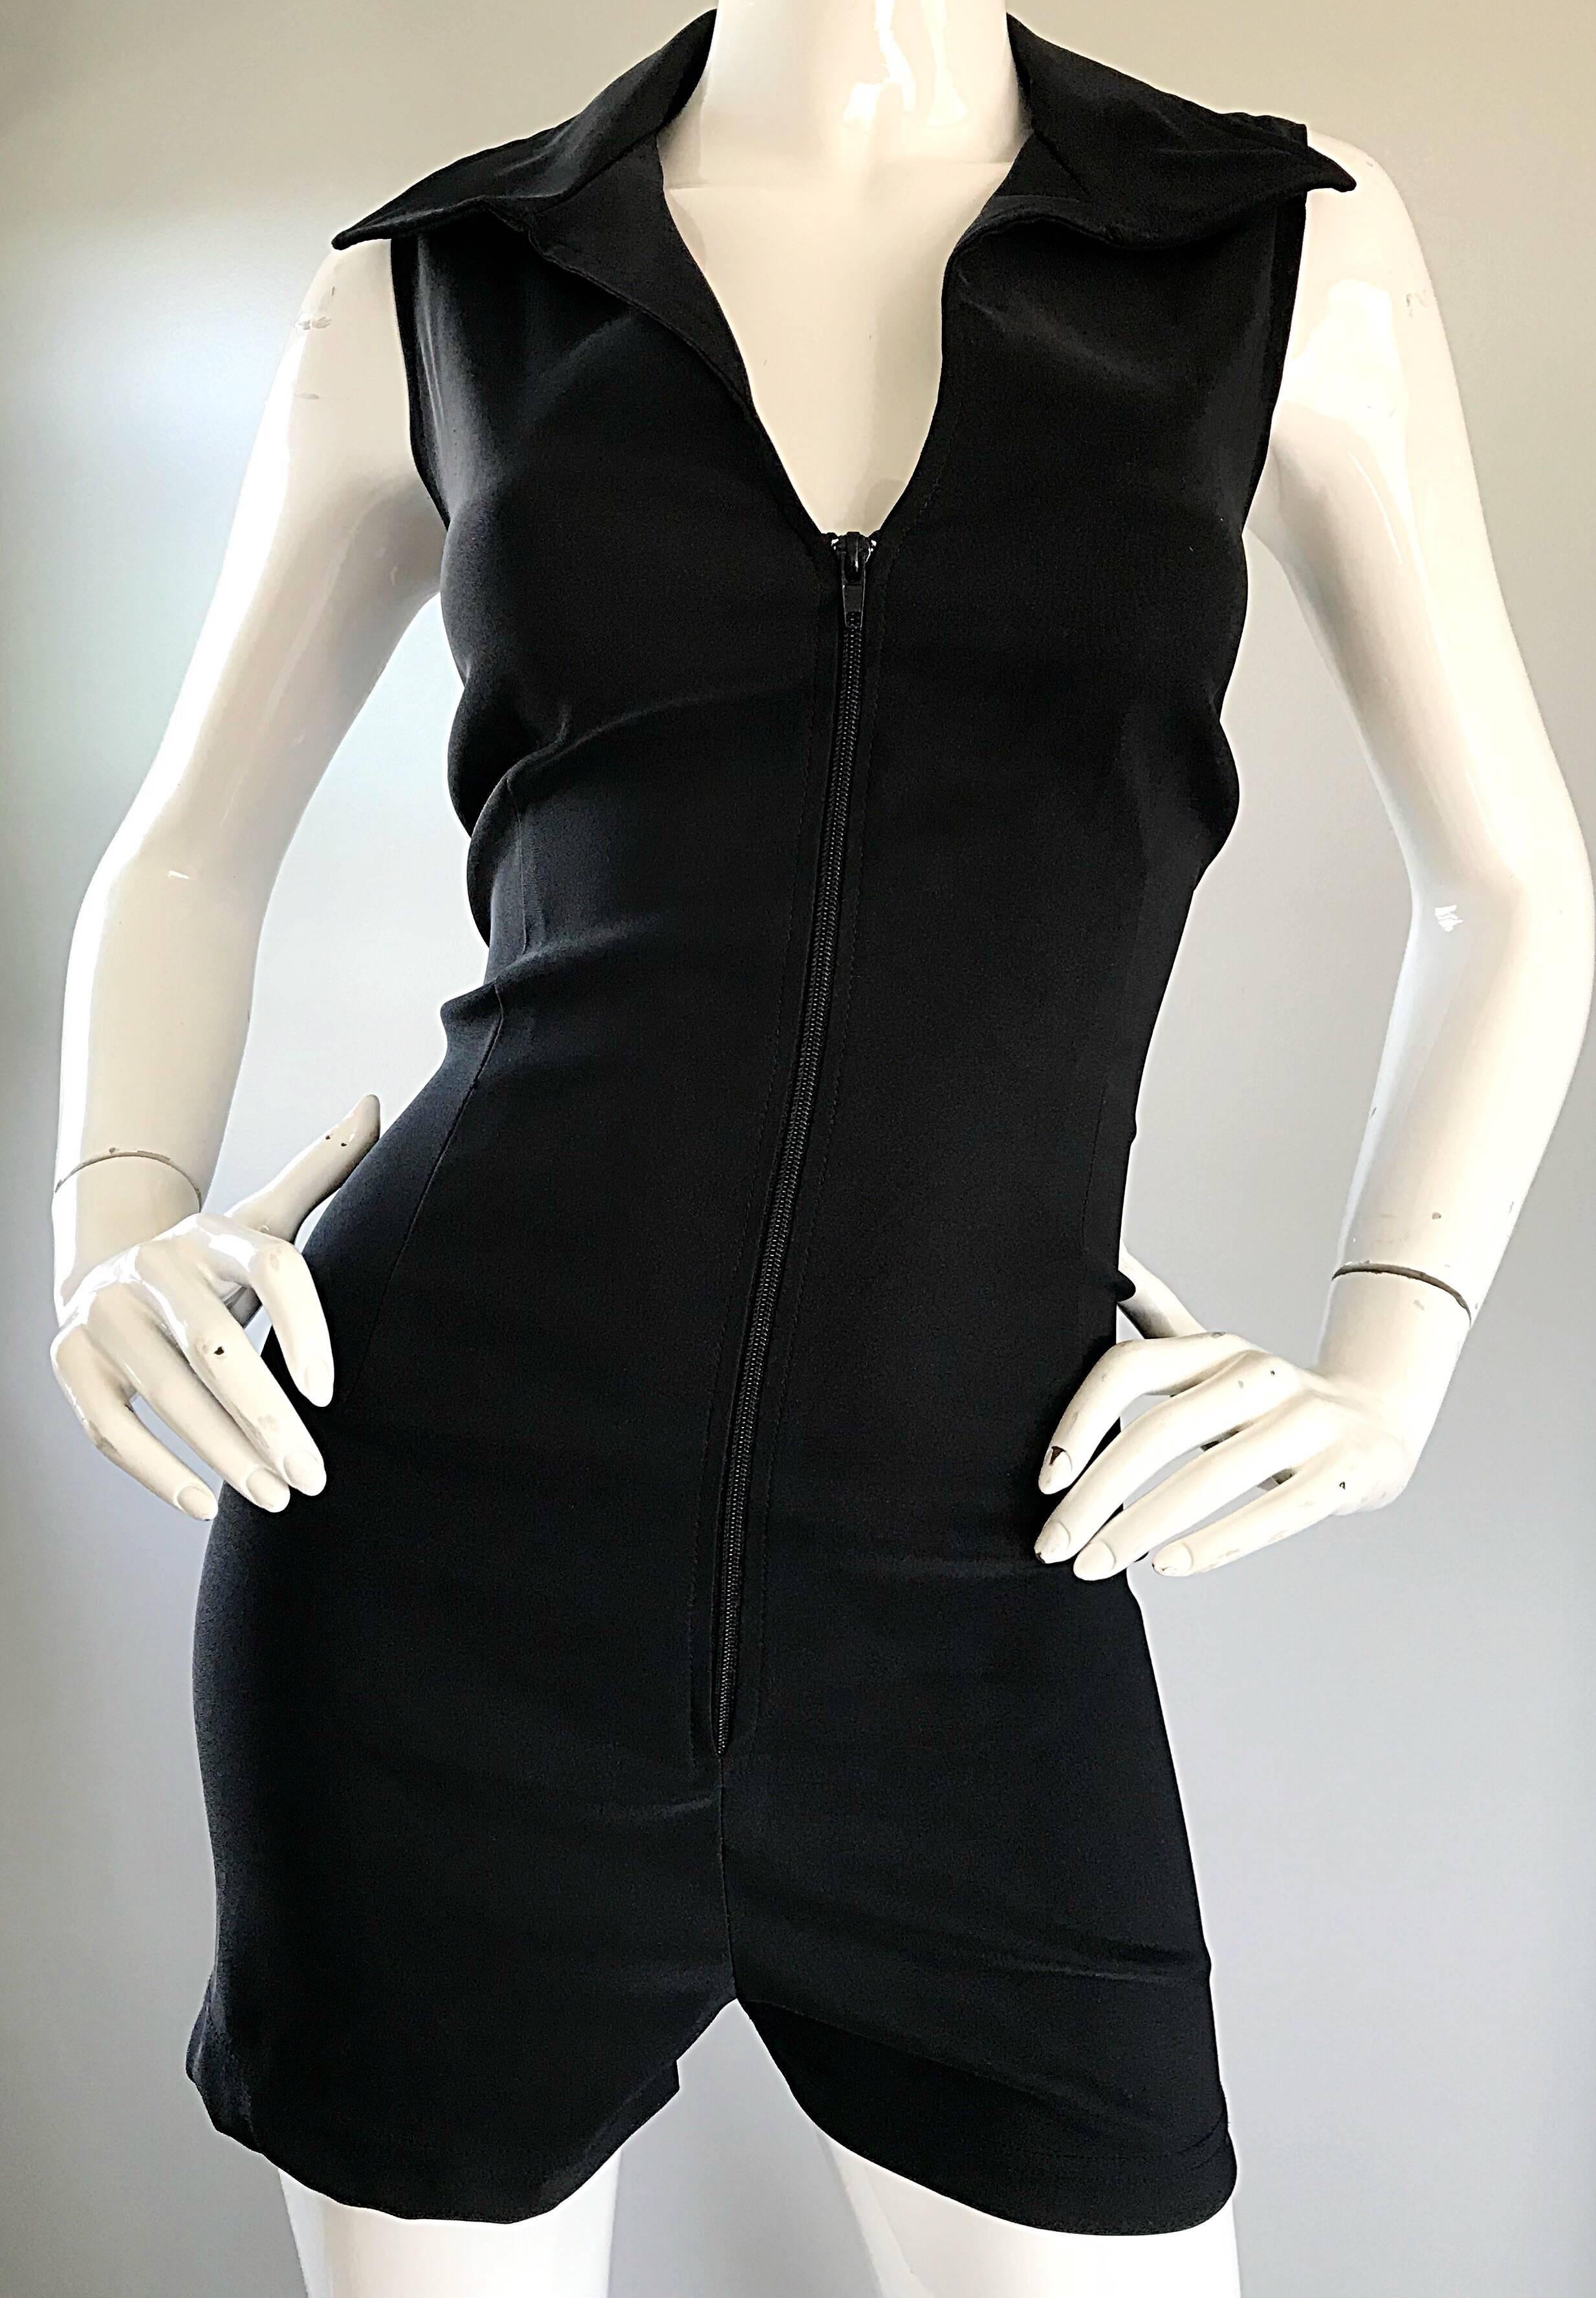 1990s Does 1970s Black Crepe Sleeveless One Piece 90s Vintage Romper Jumpsuit For Sale 3